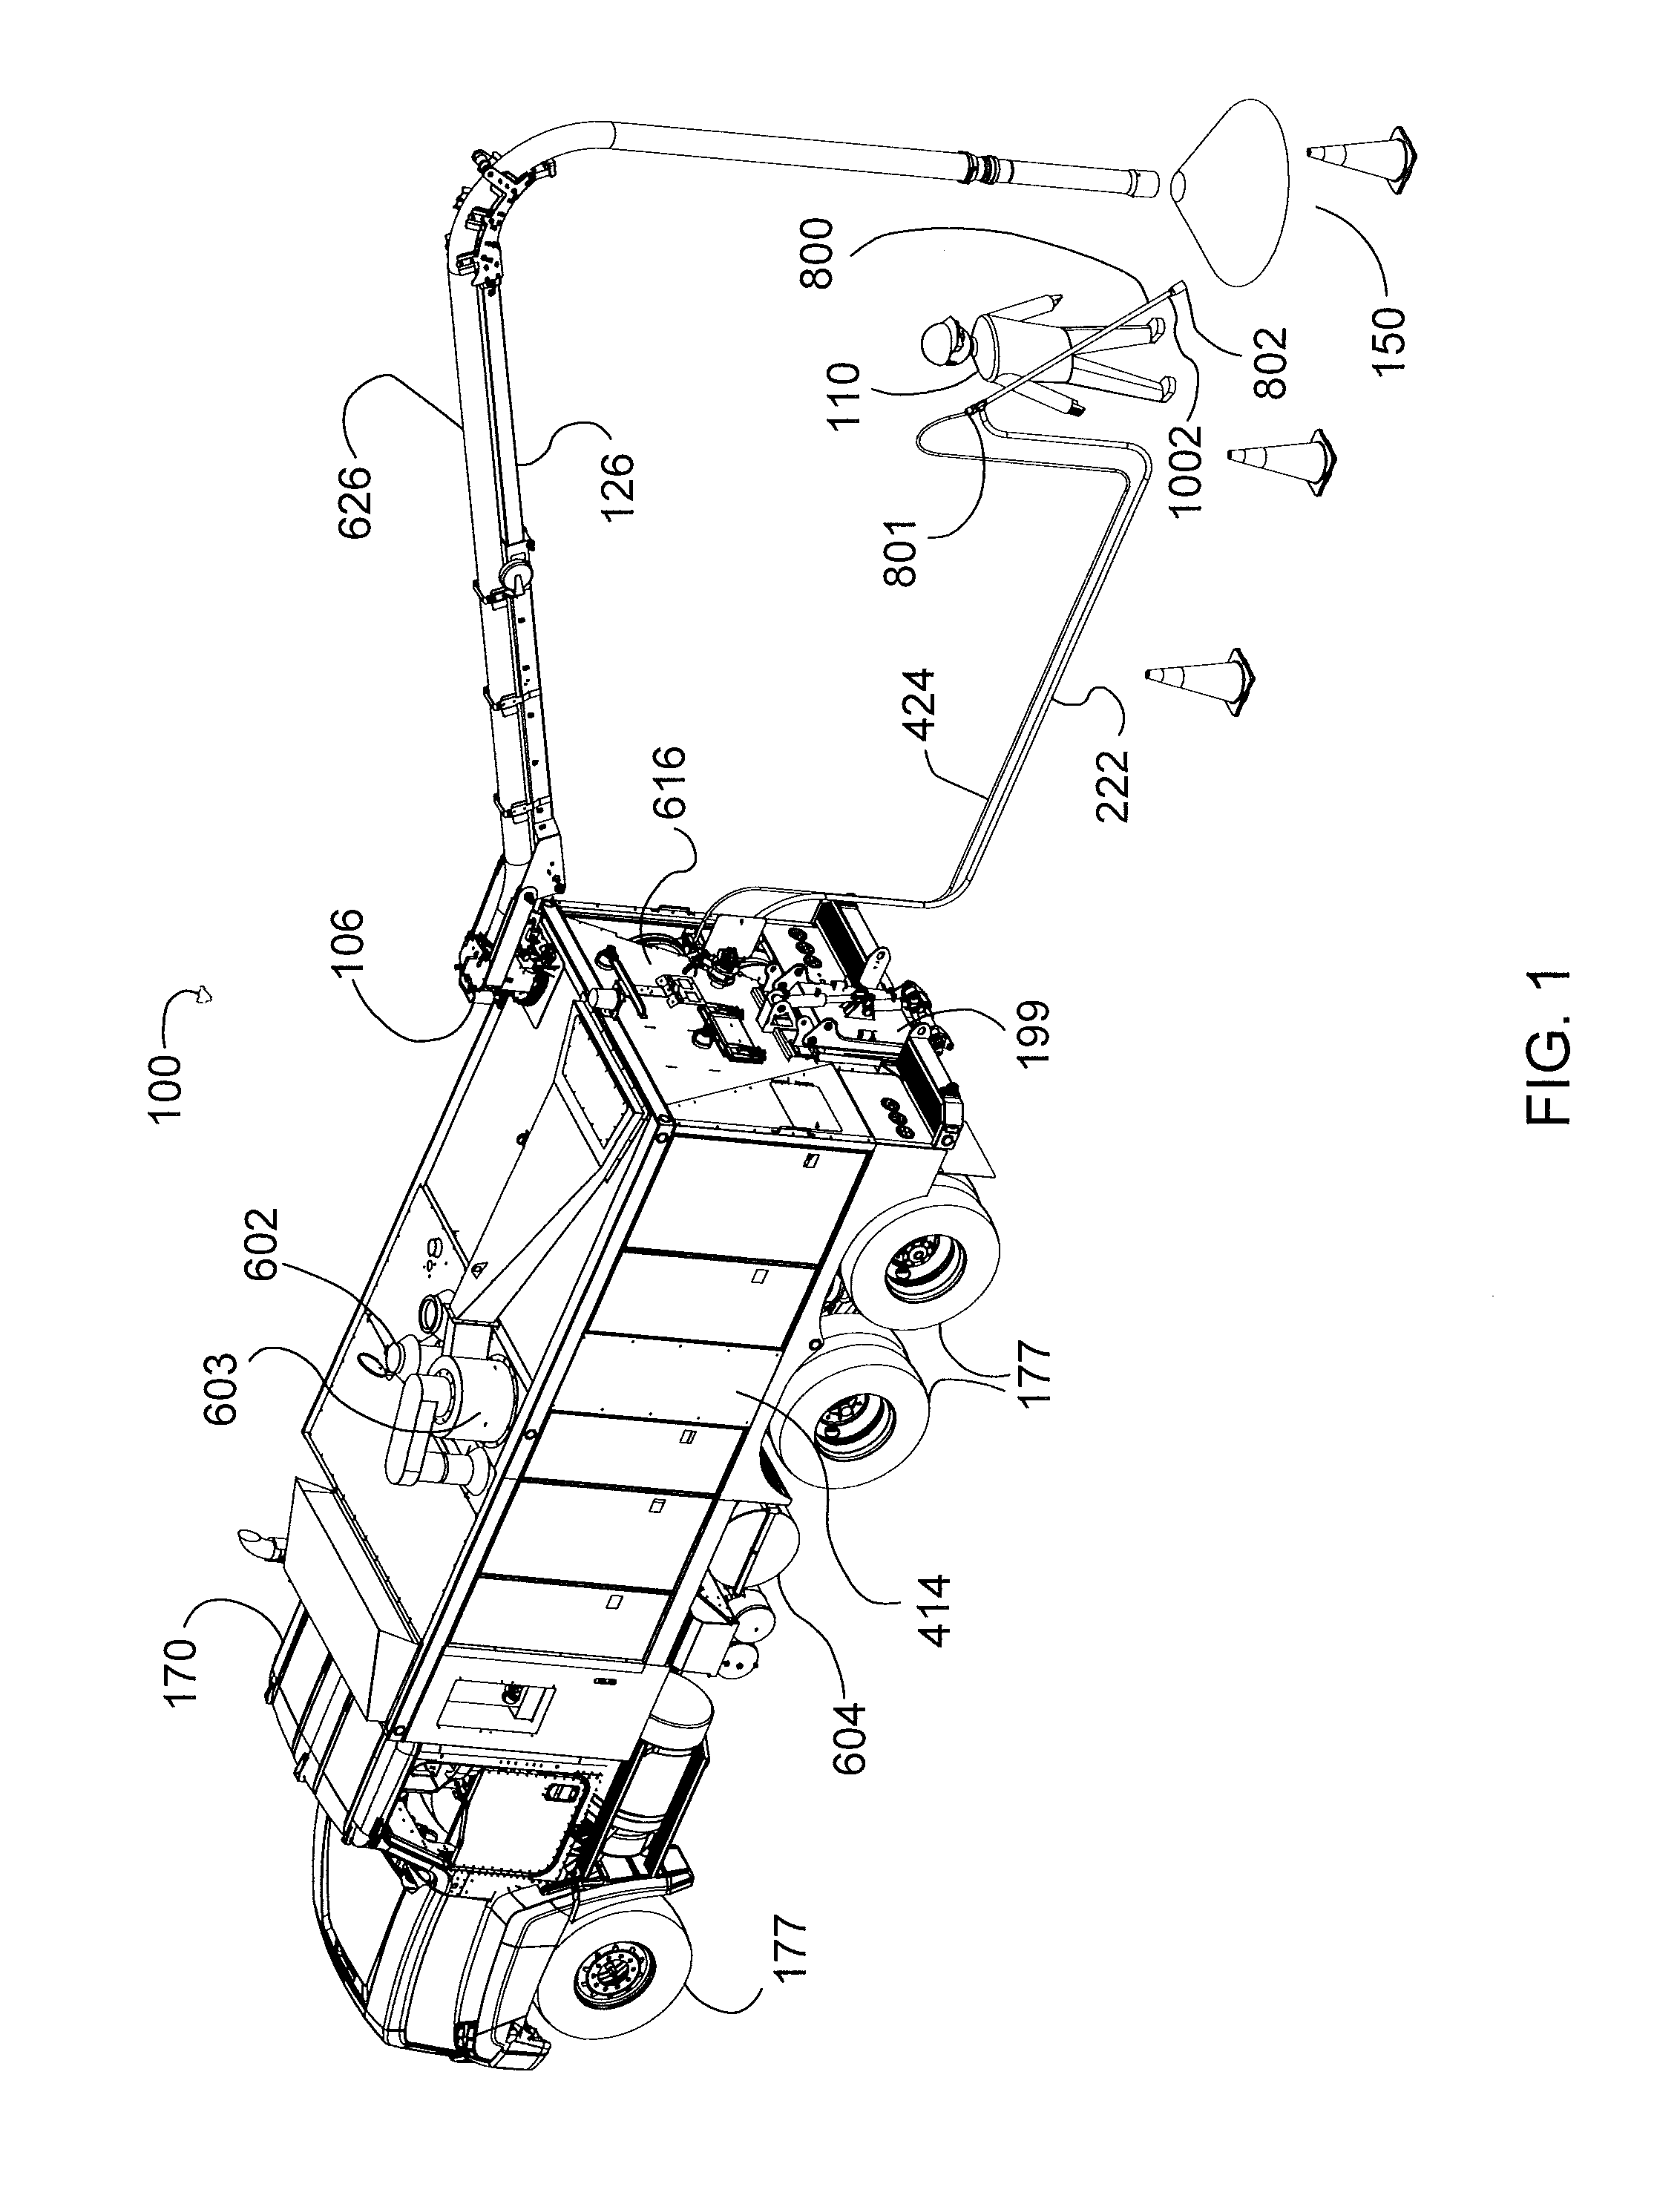 Vacuum unit and truck with air and water